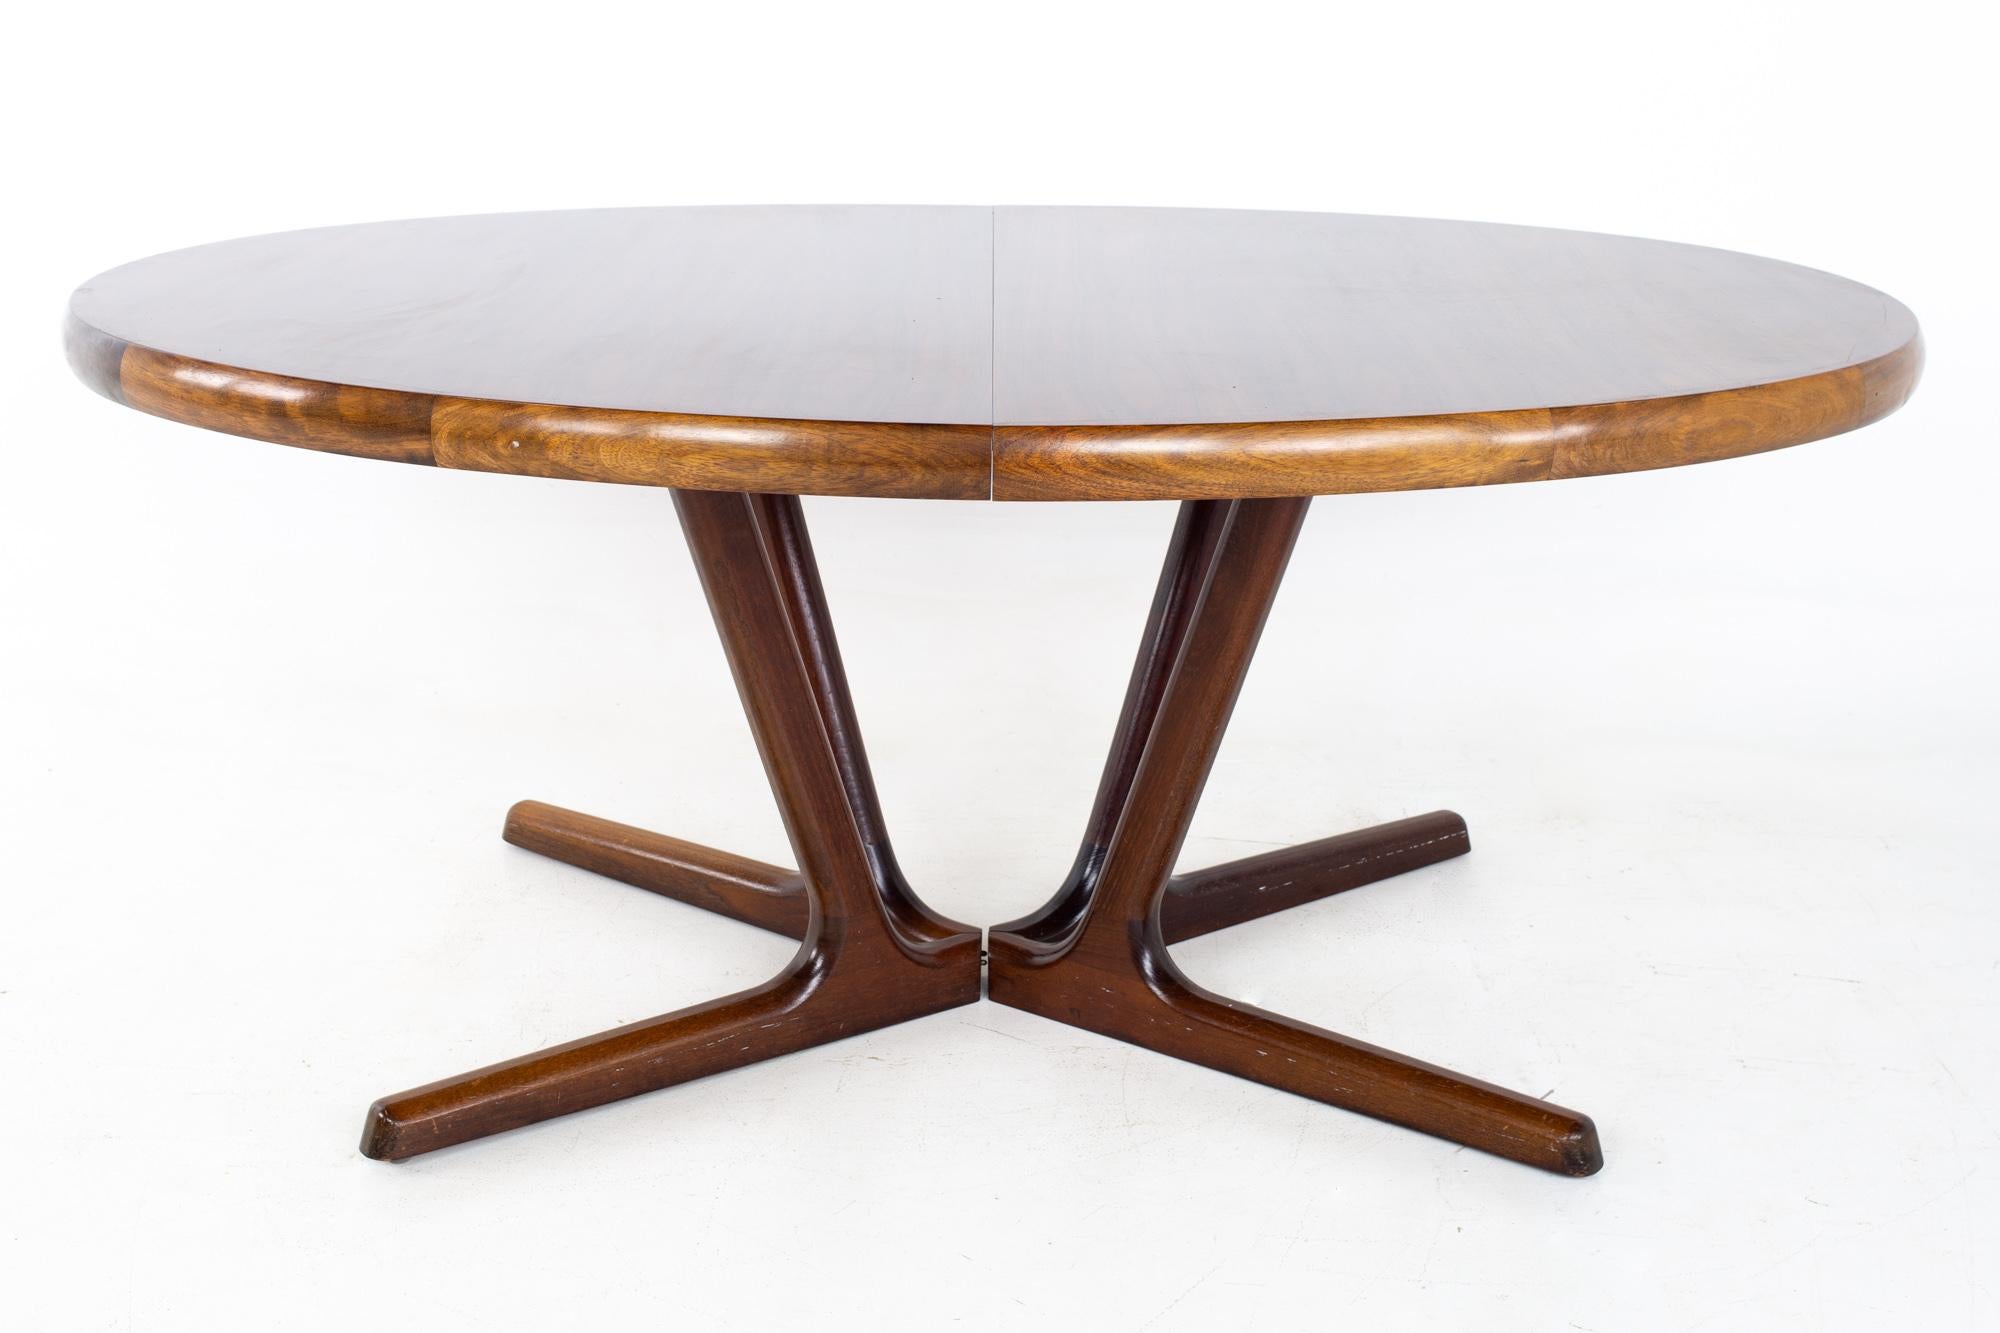 12 person oval dining table